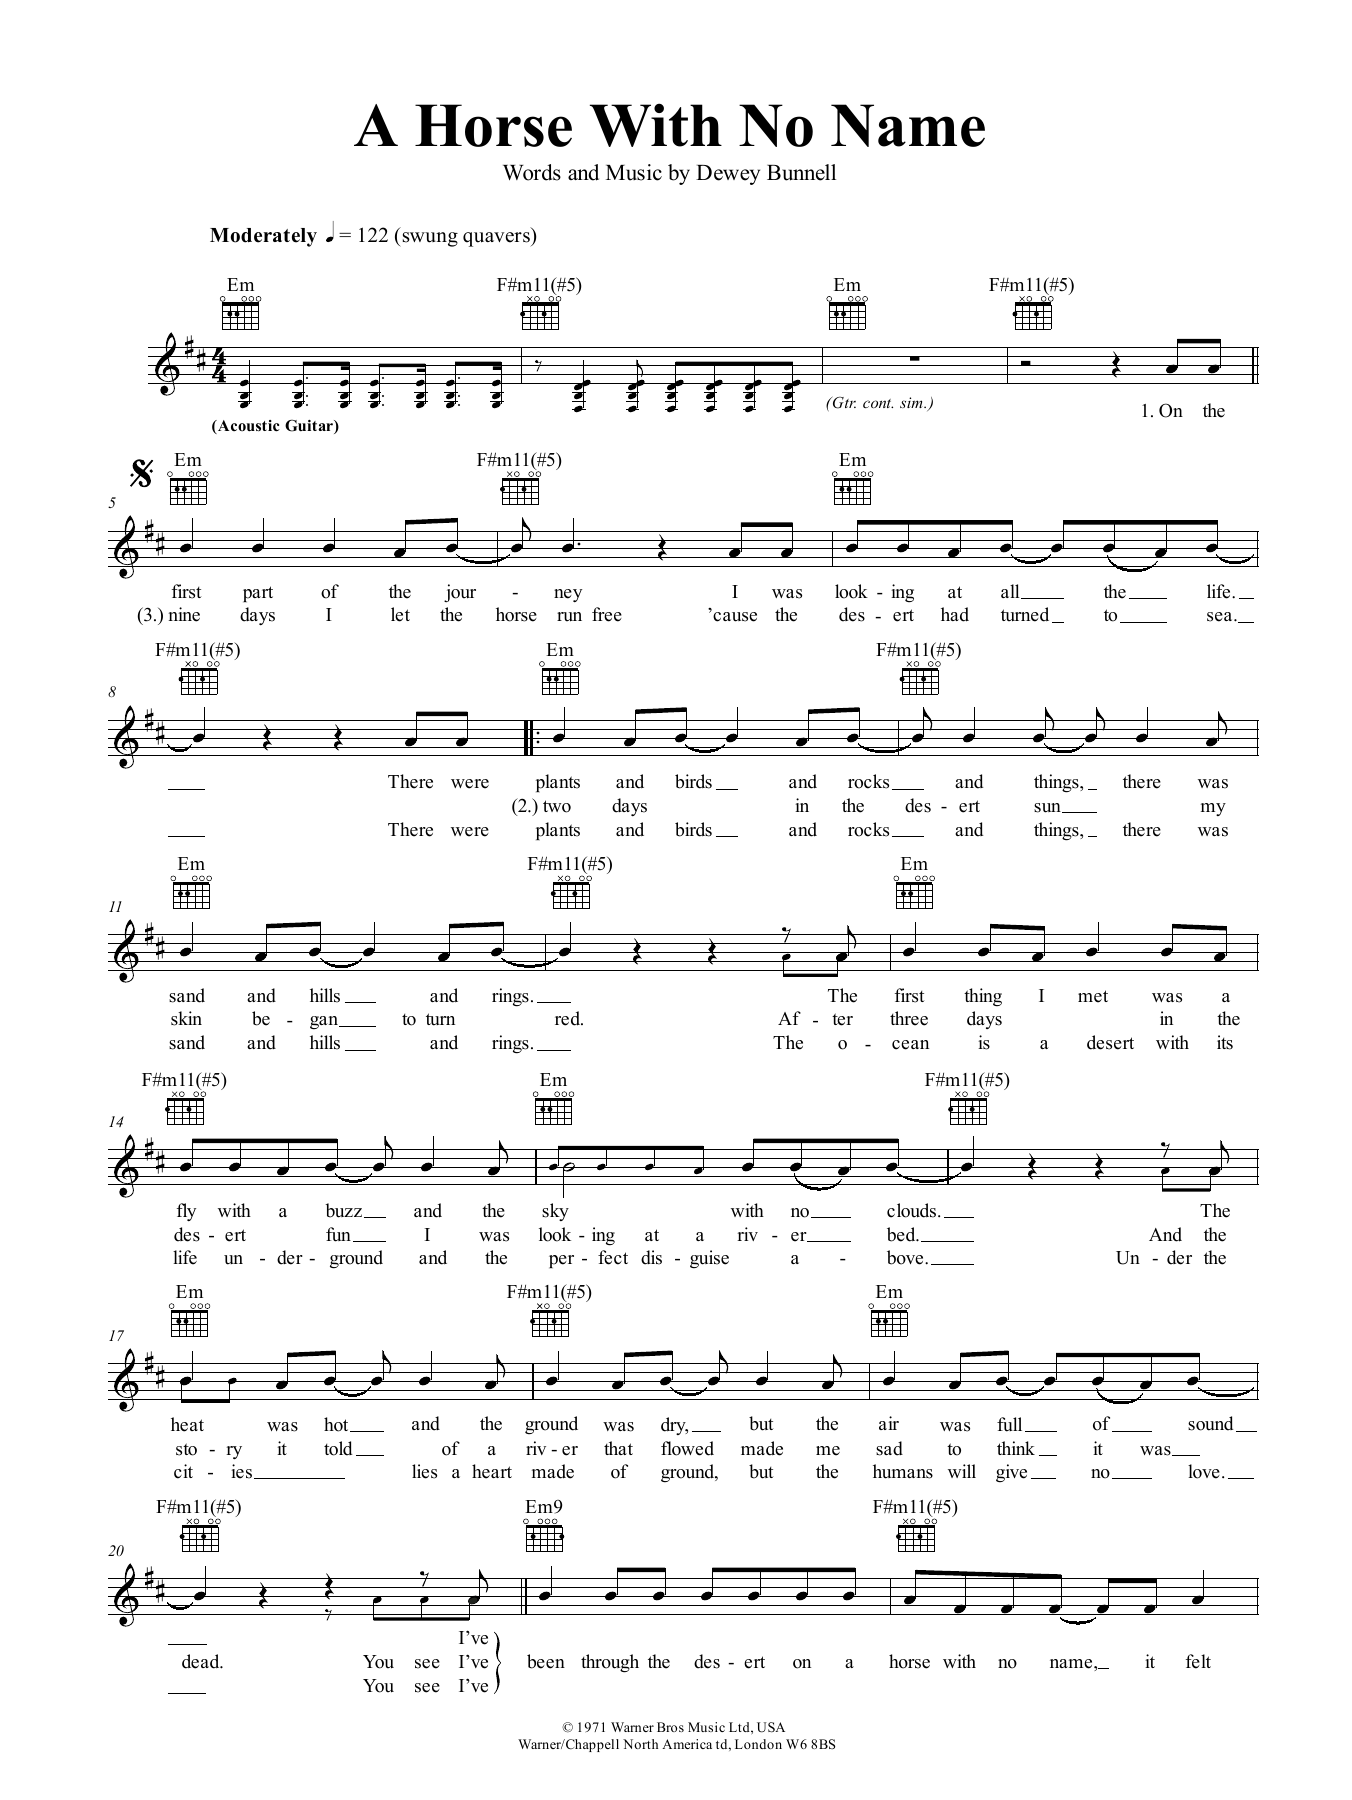 Download America A Horse With No Name Sheet Music